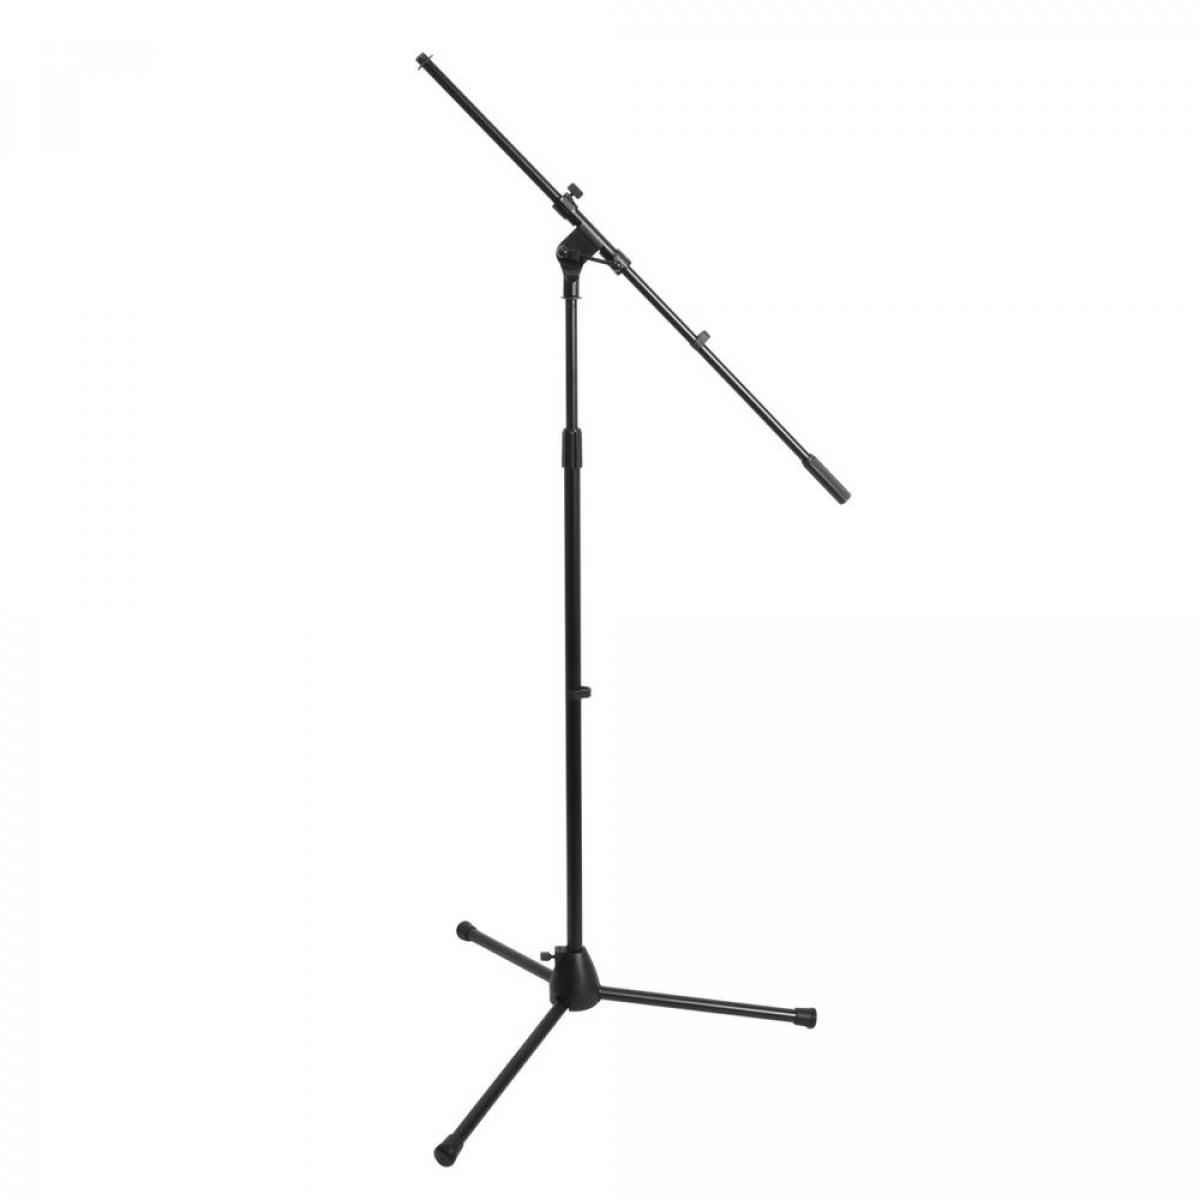 On-Stage MS7701B Euro-Boom Microphone Stand, Black 6355052844008 | eBay